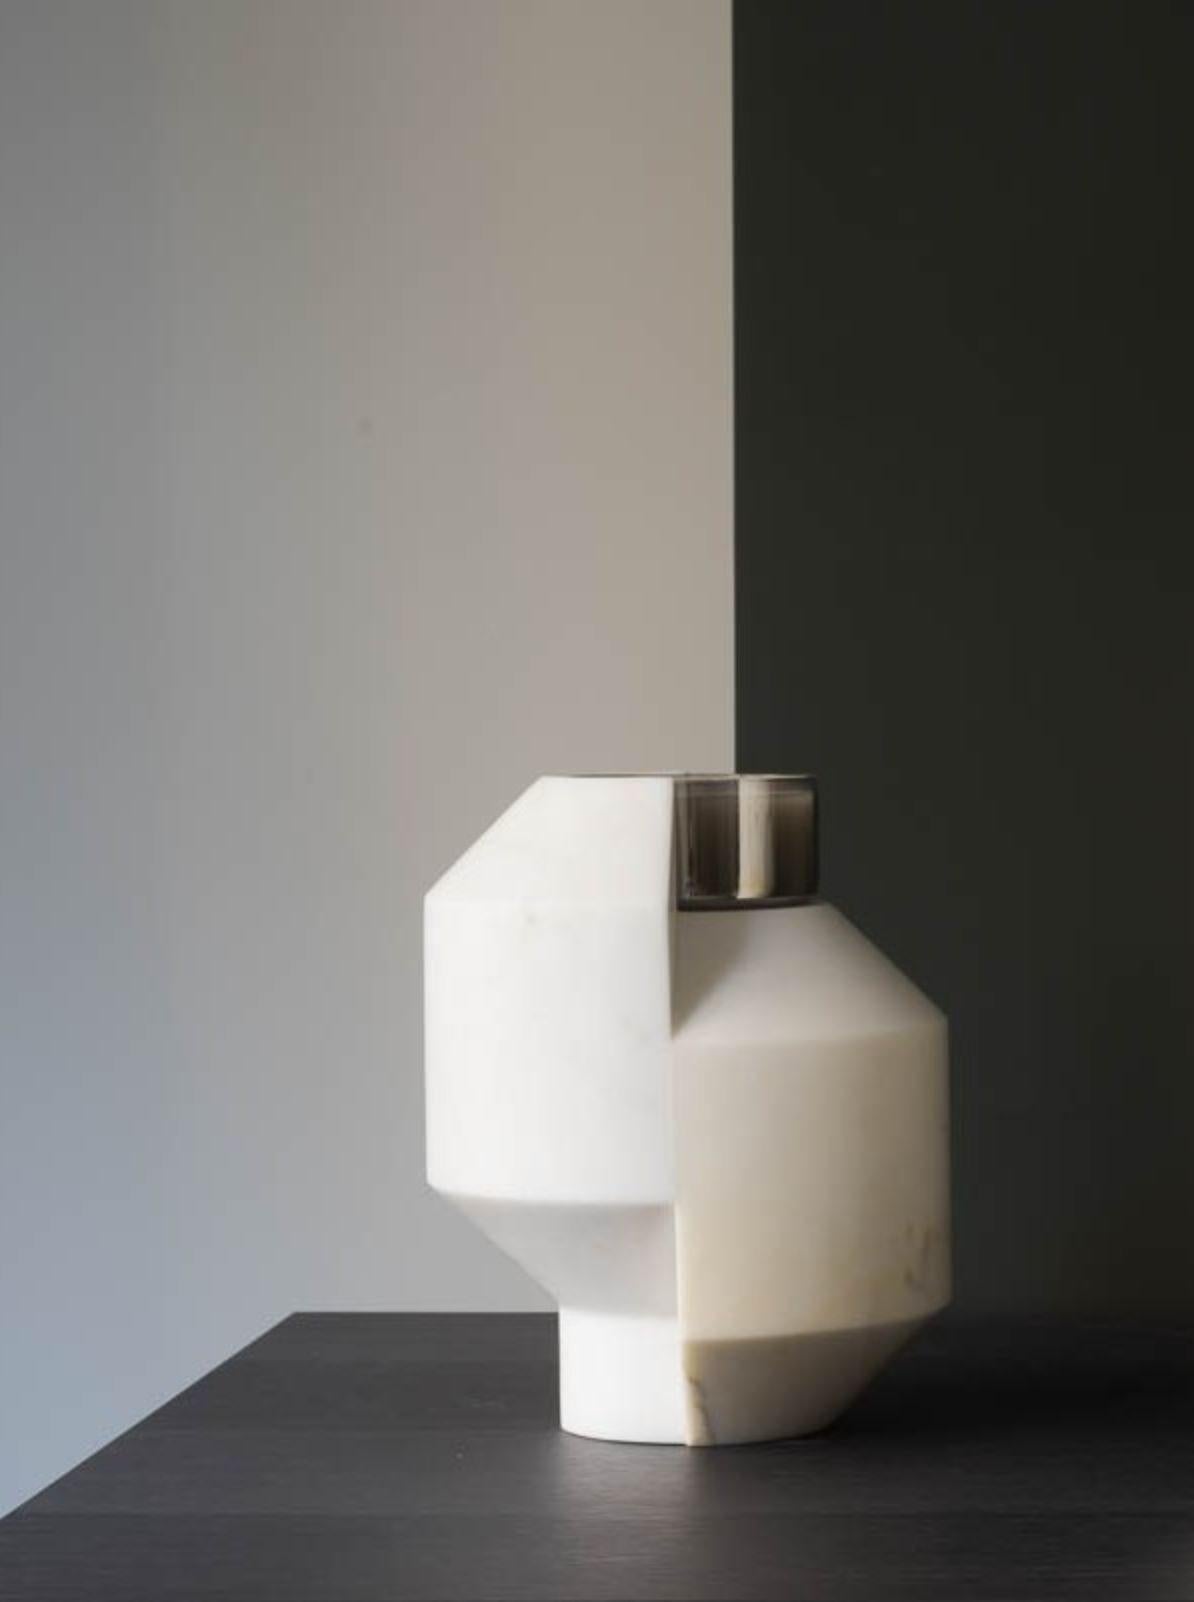 Toucana small Paonazzo candleholder by oOumm
Dimensions: 205 x 102 x H 252 mm
Materials: Marble 


Marble available:
Portoro
Paonazzo


oOumm is a French brand at the crossroads of design pieces and fragrance. oOumm aspires to reinvent the